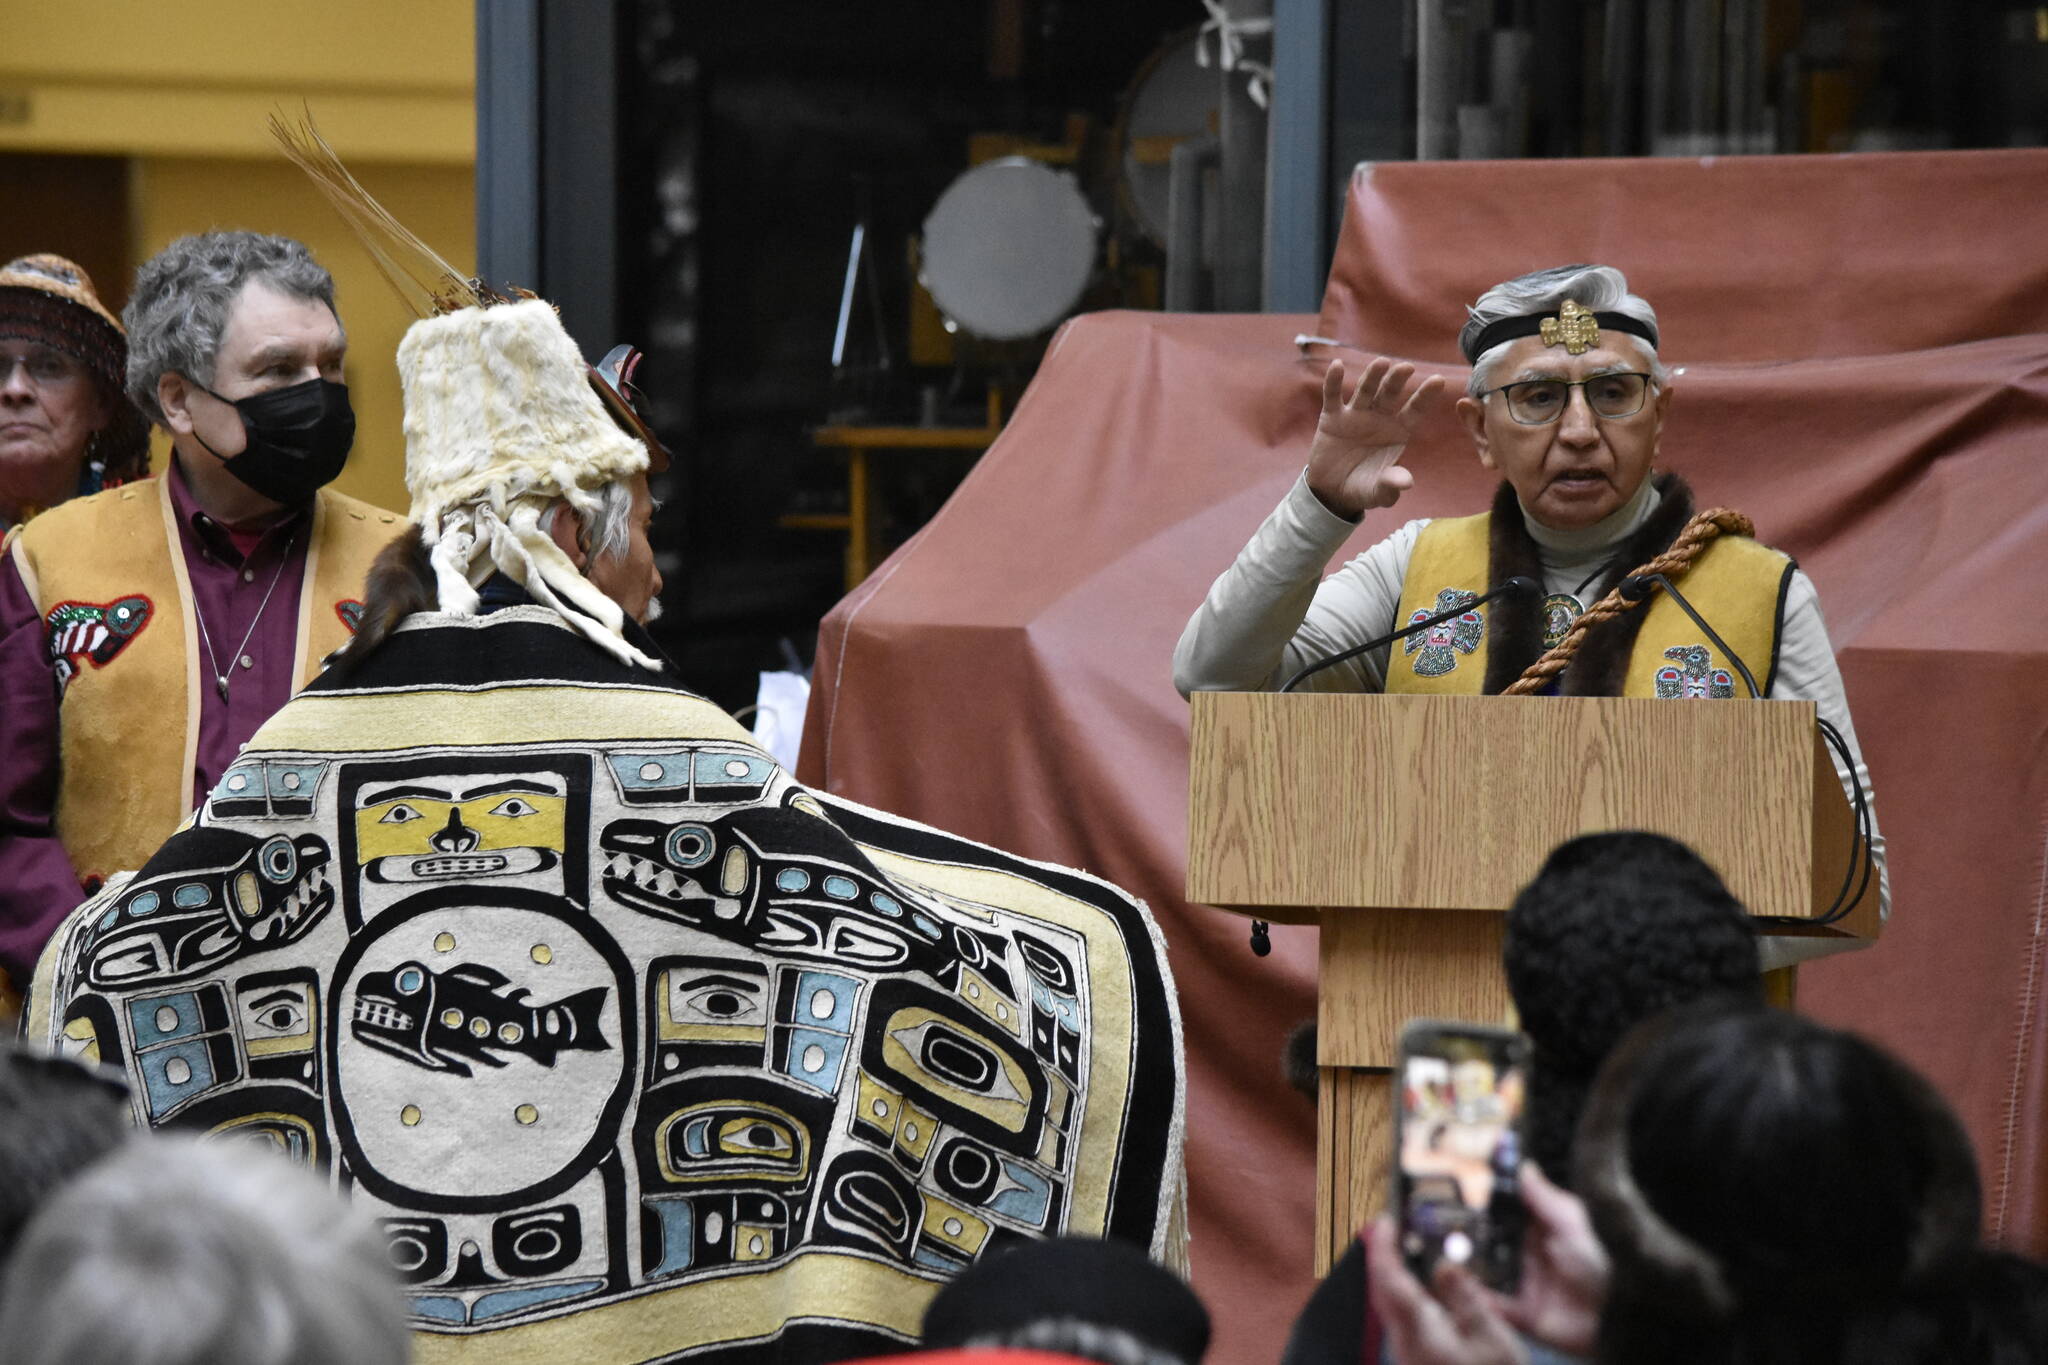 ḴiḴnkawduneek Paul Marks, Sr., right, speaks about the significance of the figures shown on a robe worn by Yéil Yádi Nathan Jackson, during a ceremony at the State Office Building on Friday, March 11, 2022. (Peter Segall / Juneau Empire)